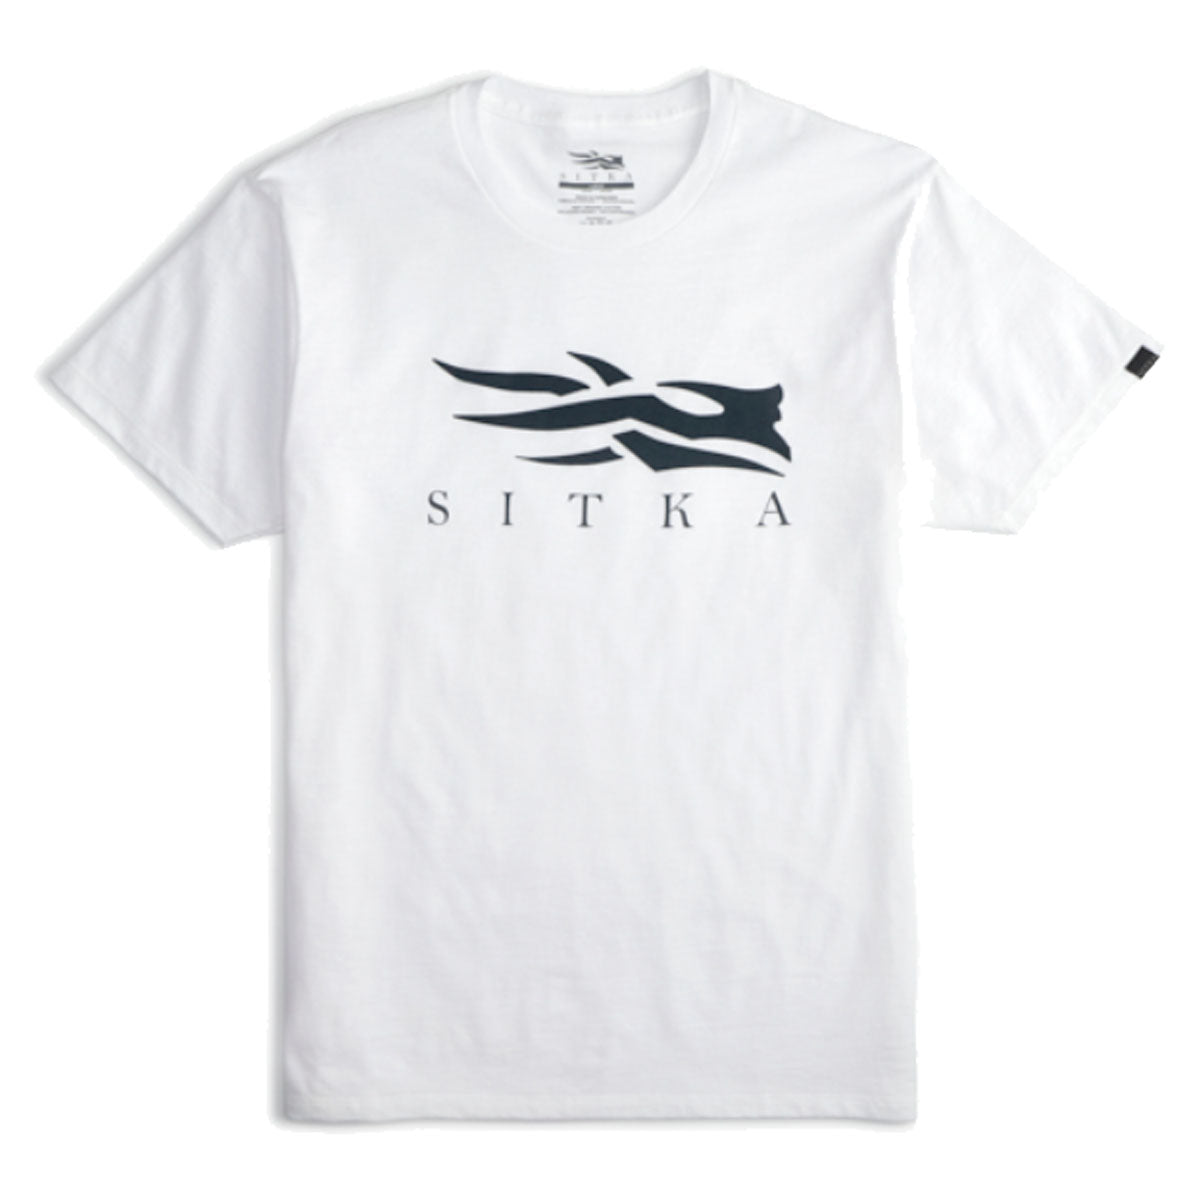 Sitka Icon Tee in  by GOHUNT | Sitka - GOHUNT Shop